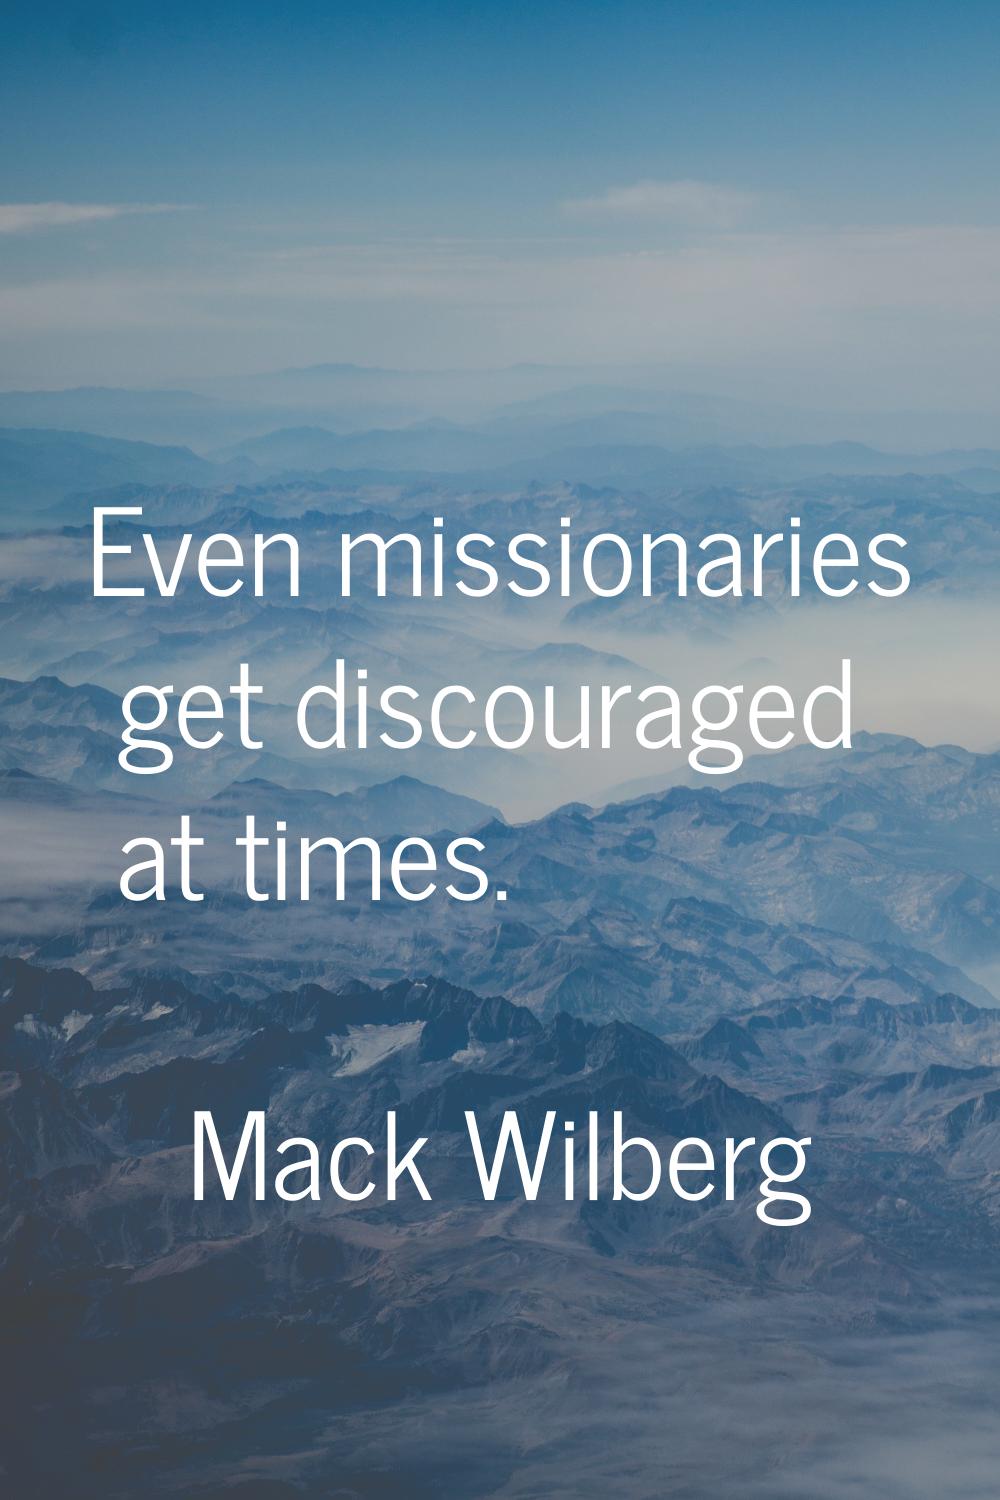 Even missionaries get discouraged at times.